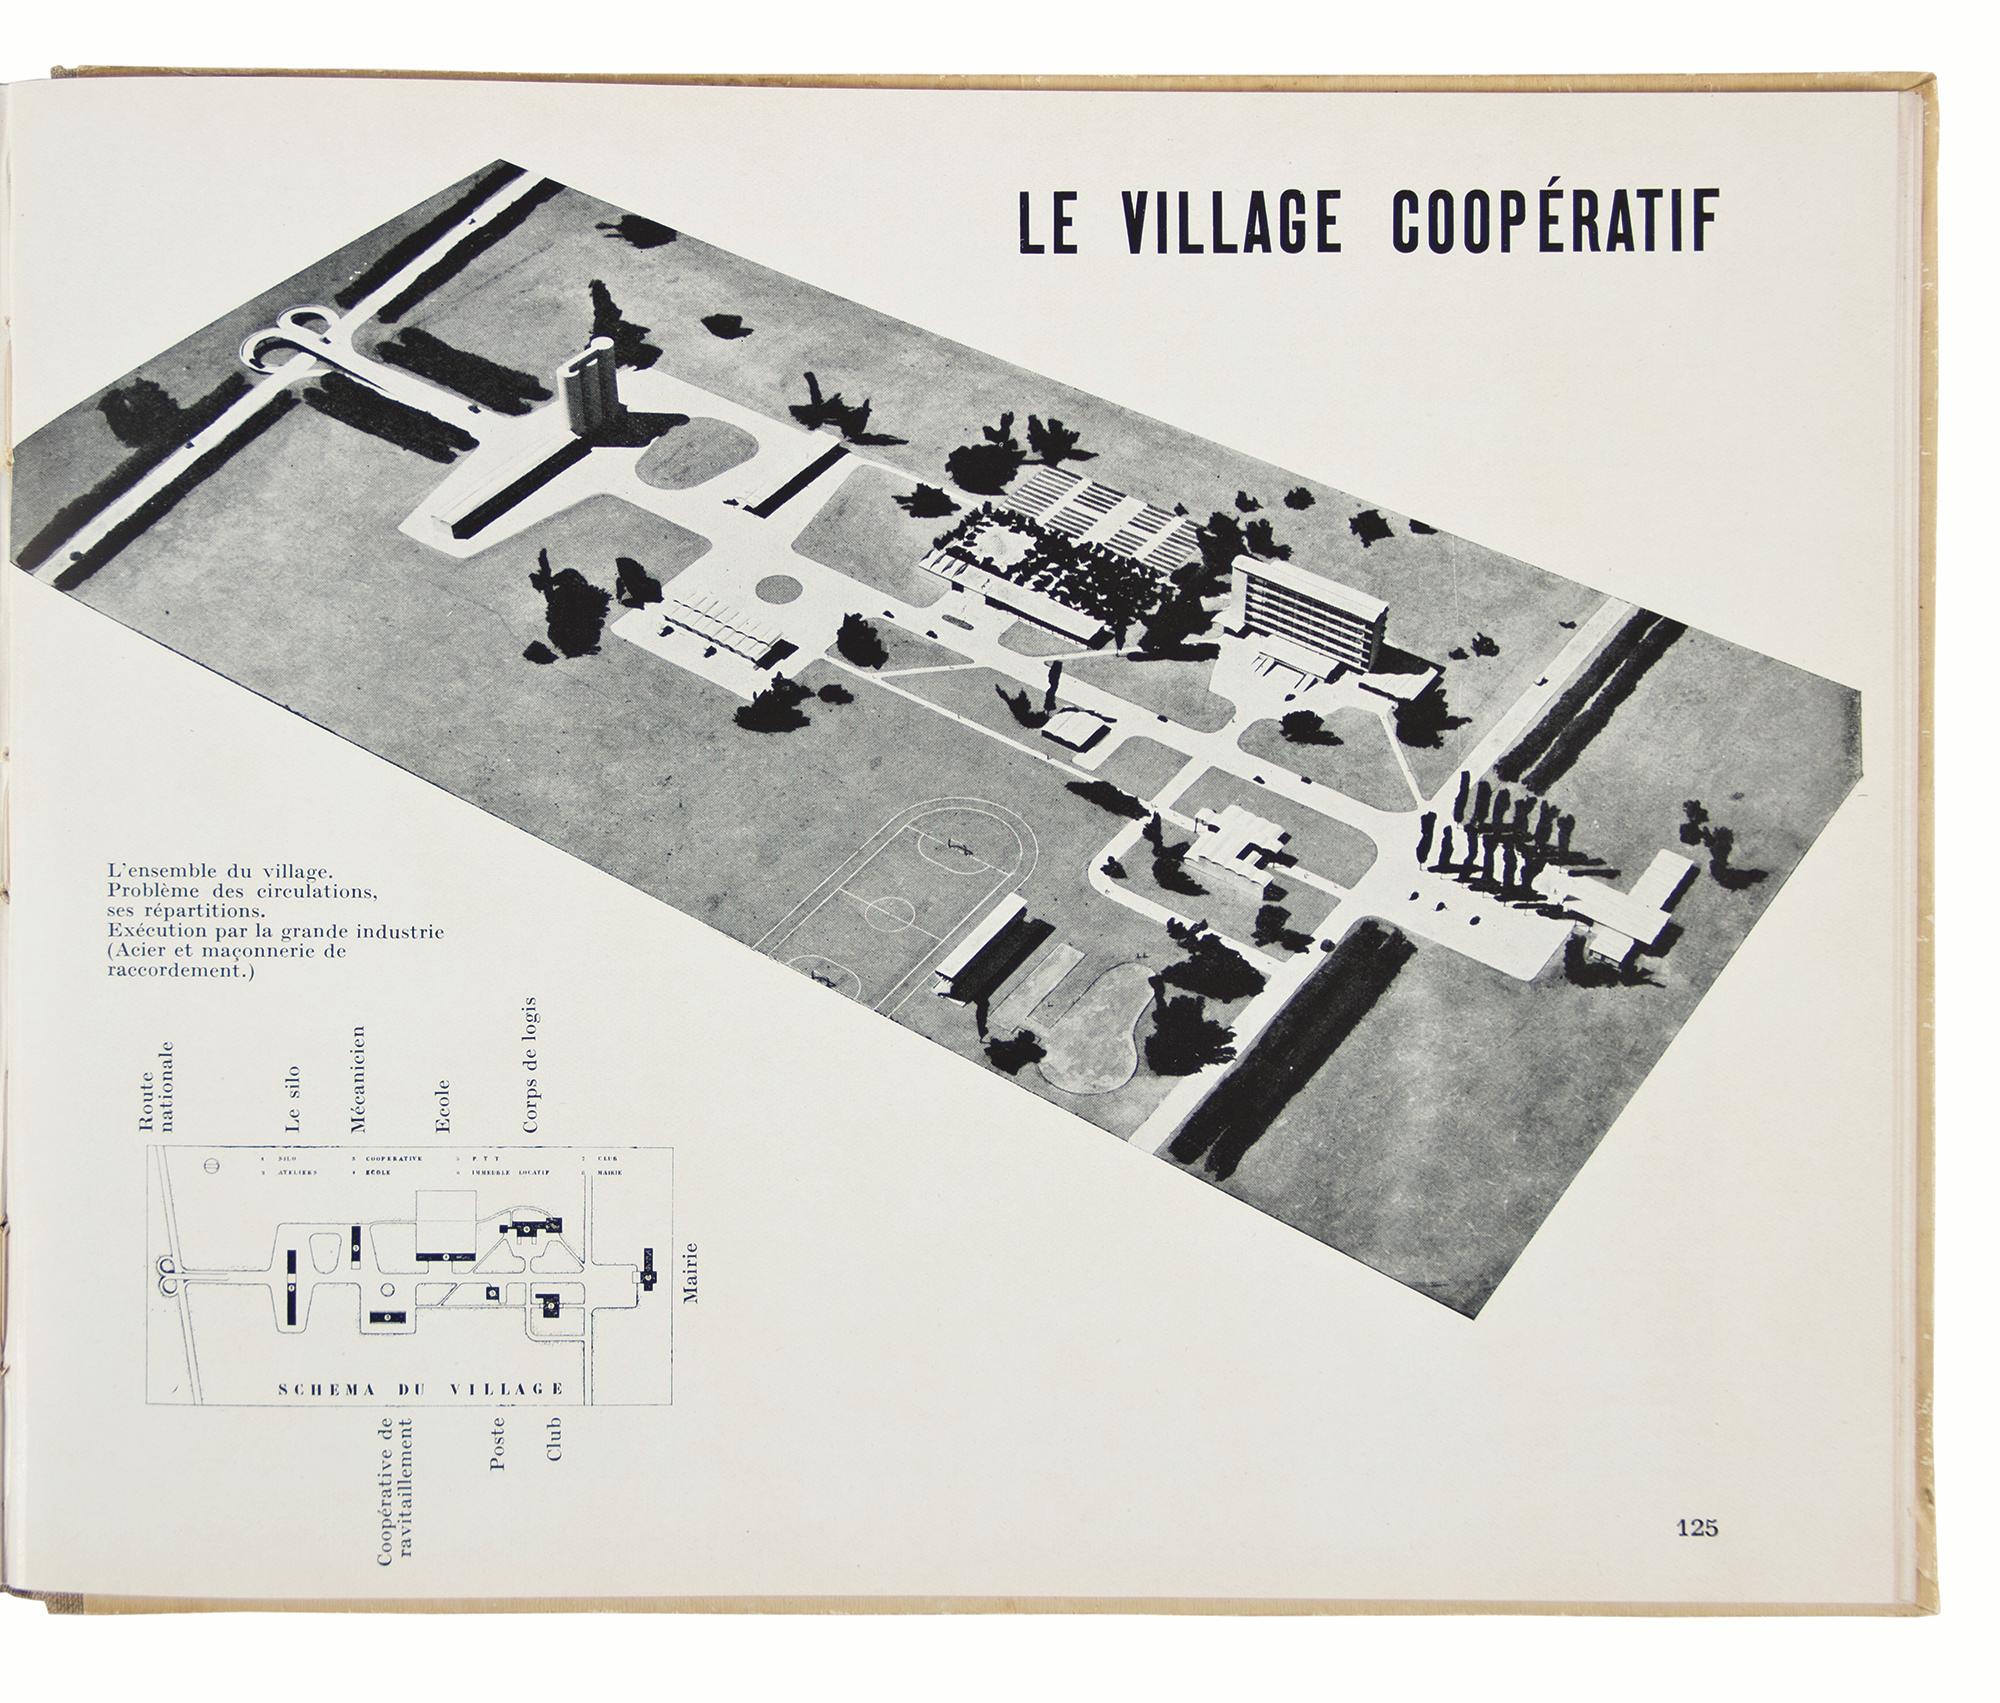 LE CORBUSIER.  Des Canons, des Munitions?  Merci!  Des Logis... s.v.p.  Oblong 4to., 283 x 230 mm, bound in original illustrated boards.  Paris: Editions de l'Architecture d'Aujourd'hui, [1938].

First Edition of one of the scarcest and most